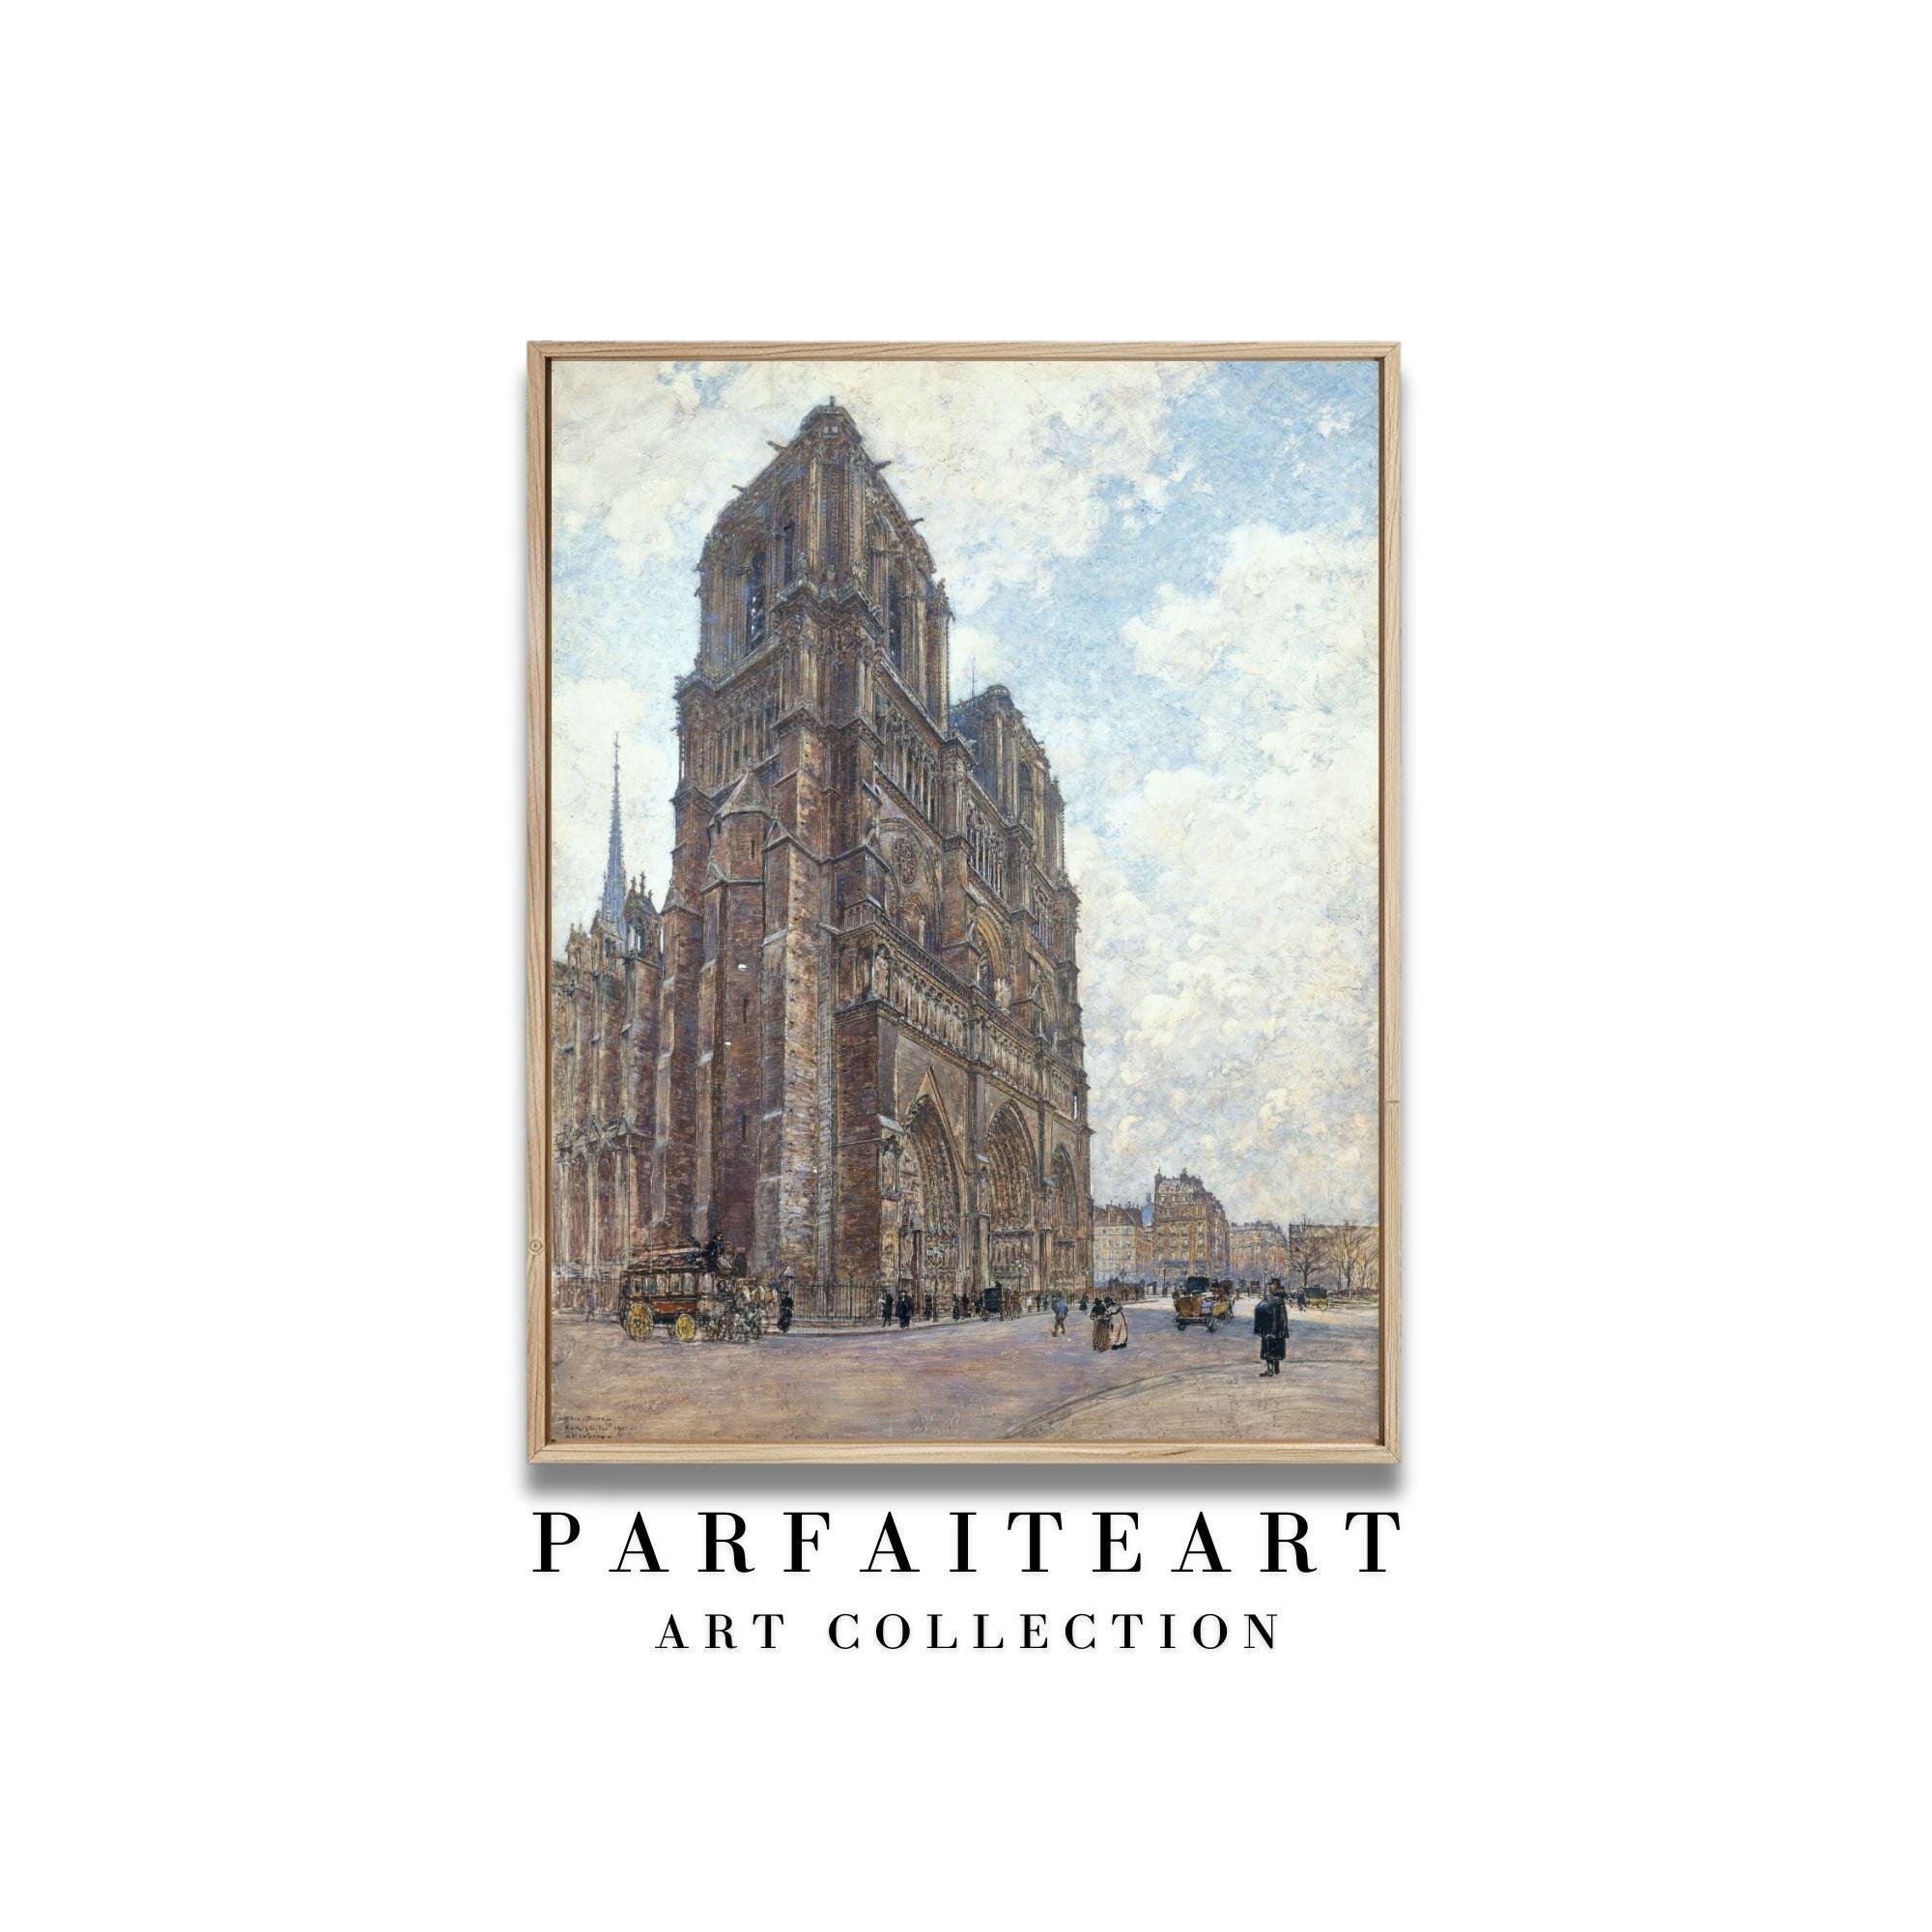 Giclée printed World Famous Paintings, Realistic Artworks and Architectural Landscapes on Printable Canvas #71